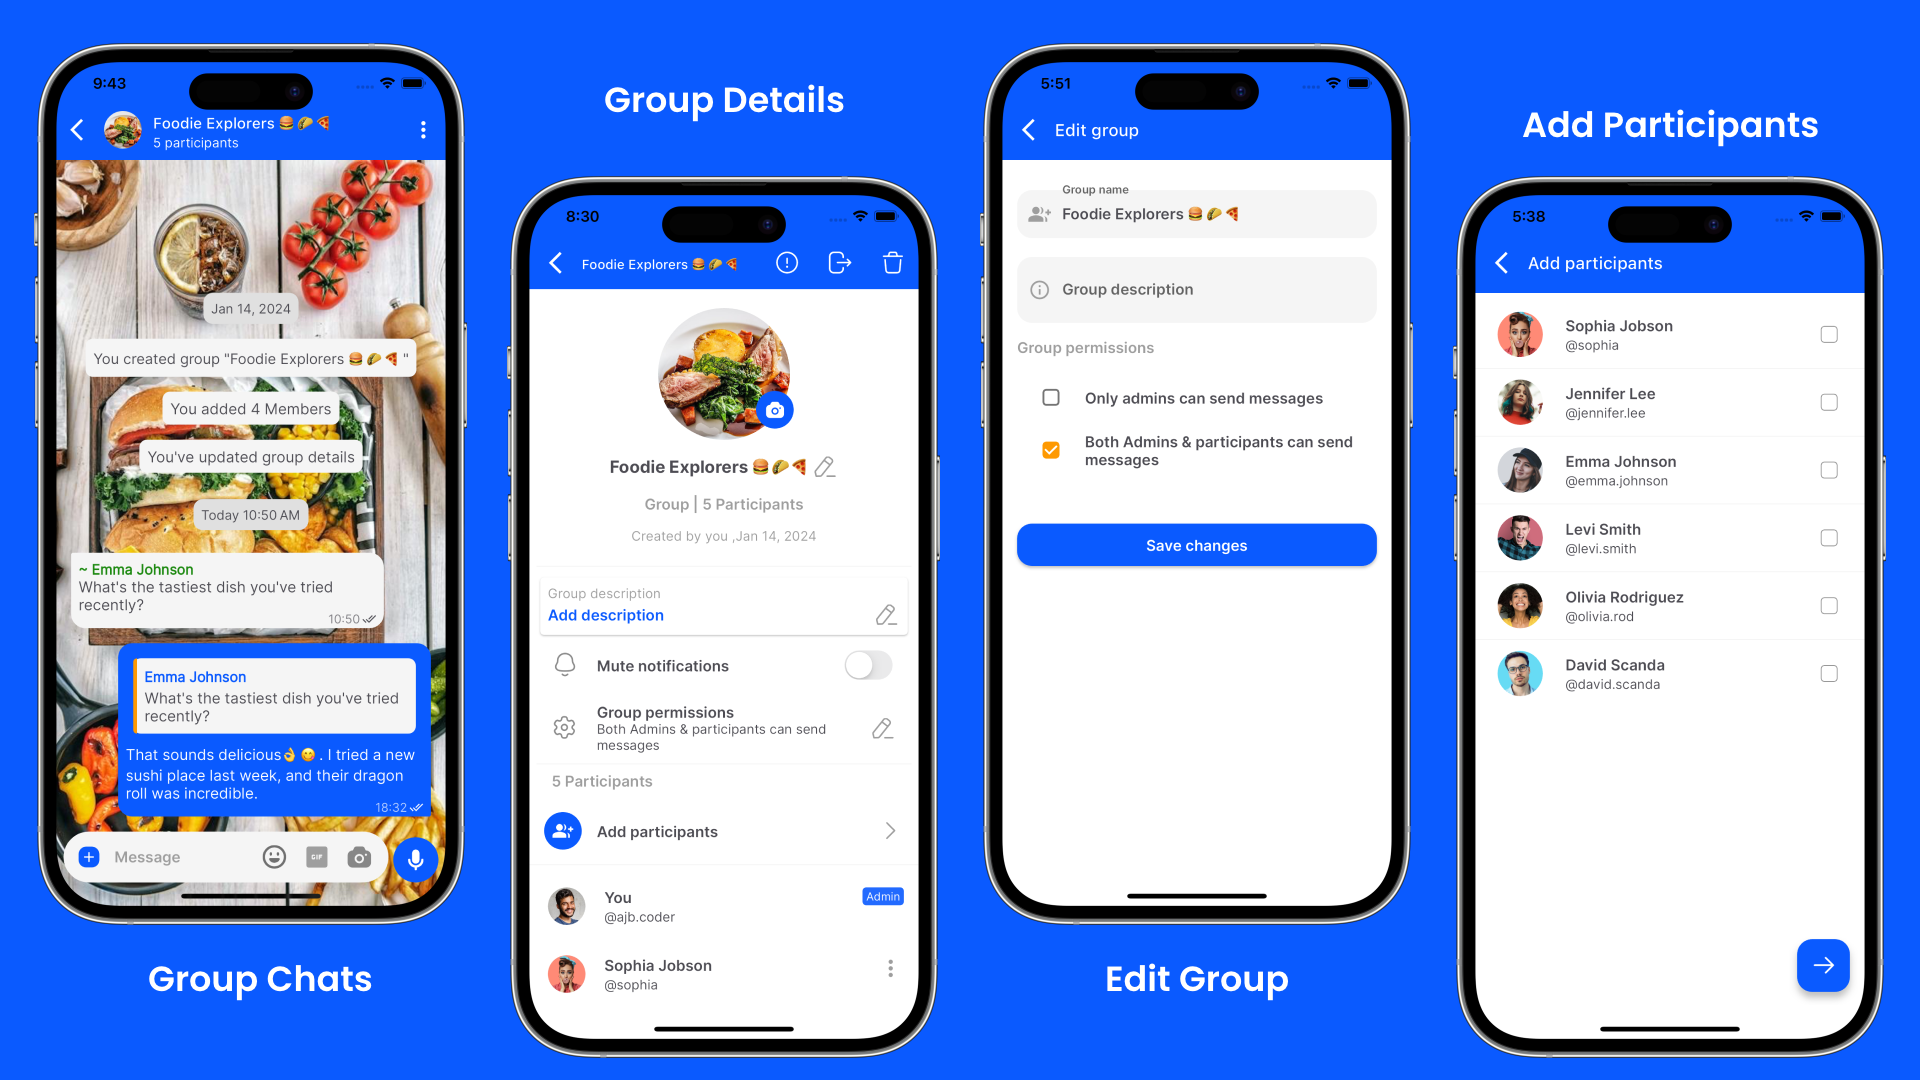 Group Chatting features